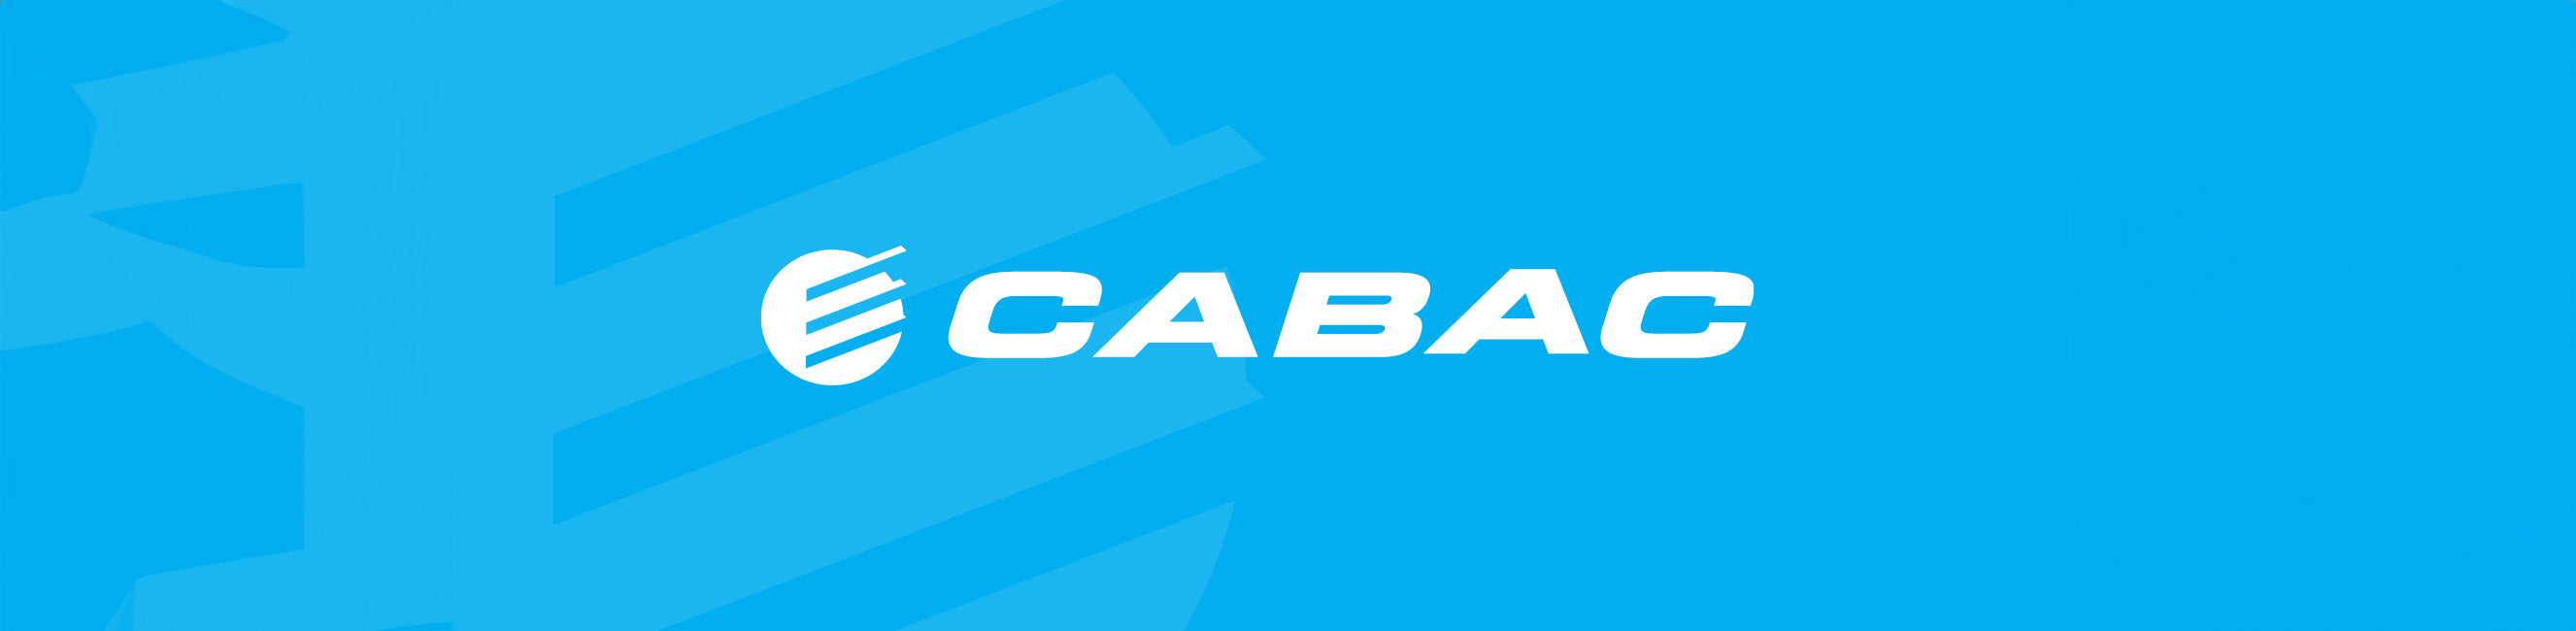 Your Electrical and Electronic Projects with CABAC Products at CCTVimporters.com.au